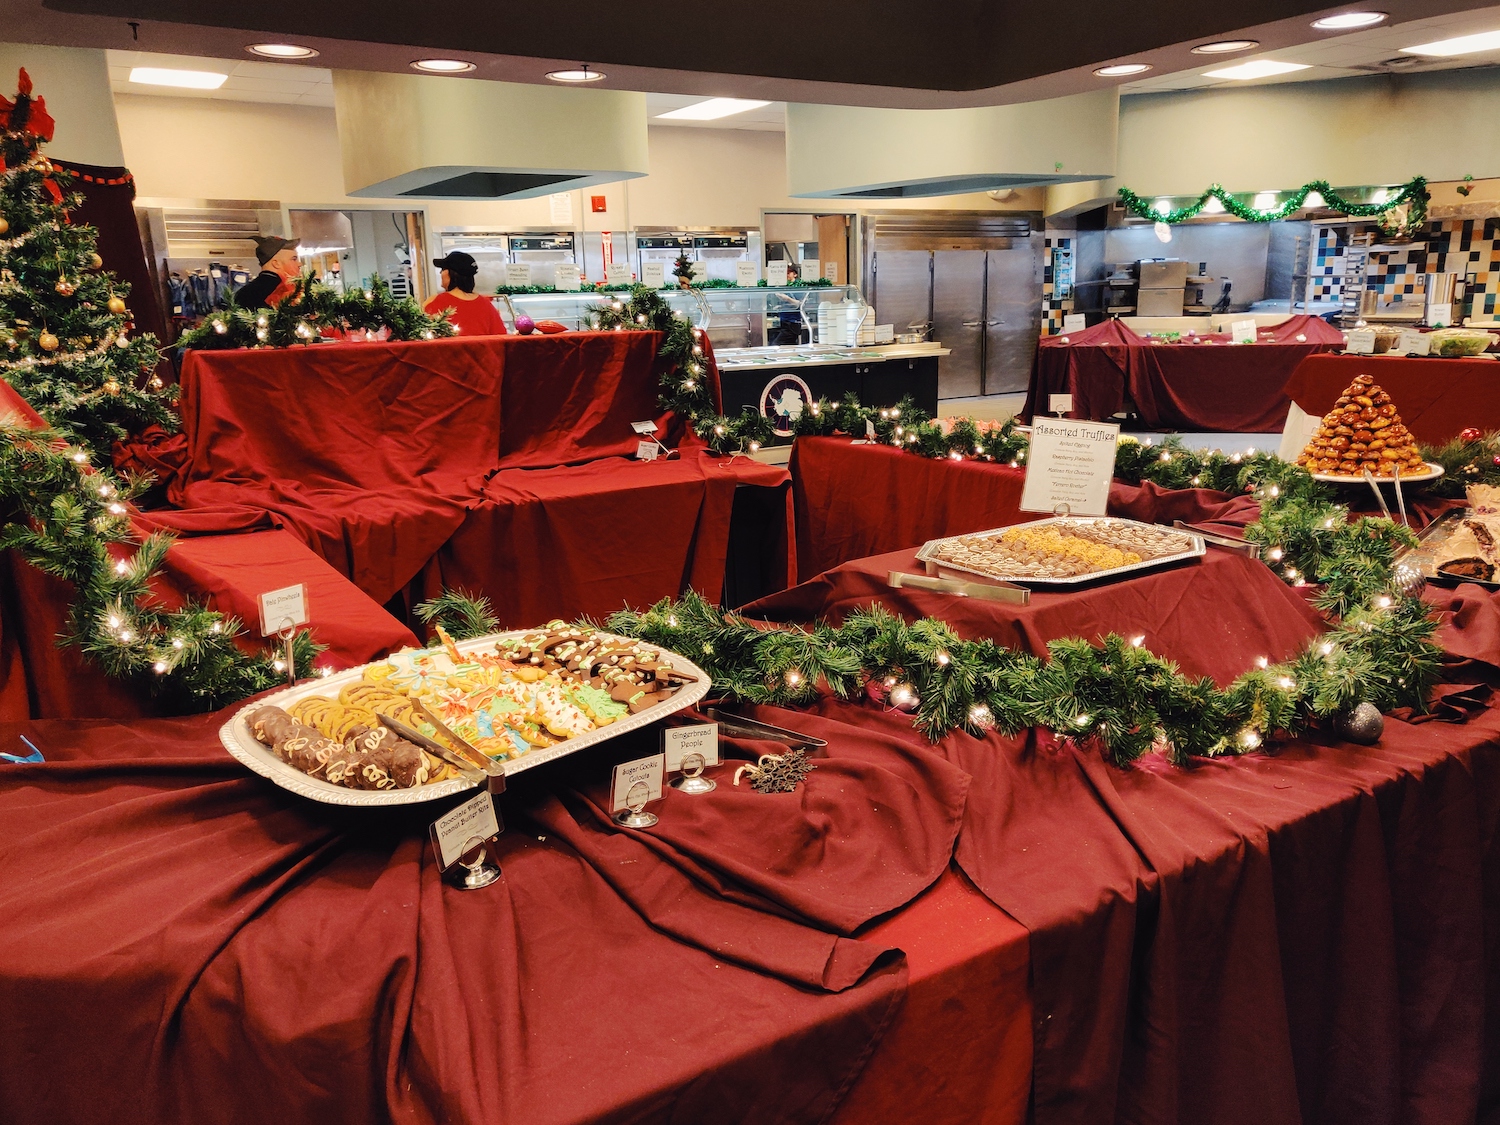 McMurdo Station galley festively decorated for Christmas